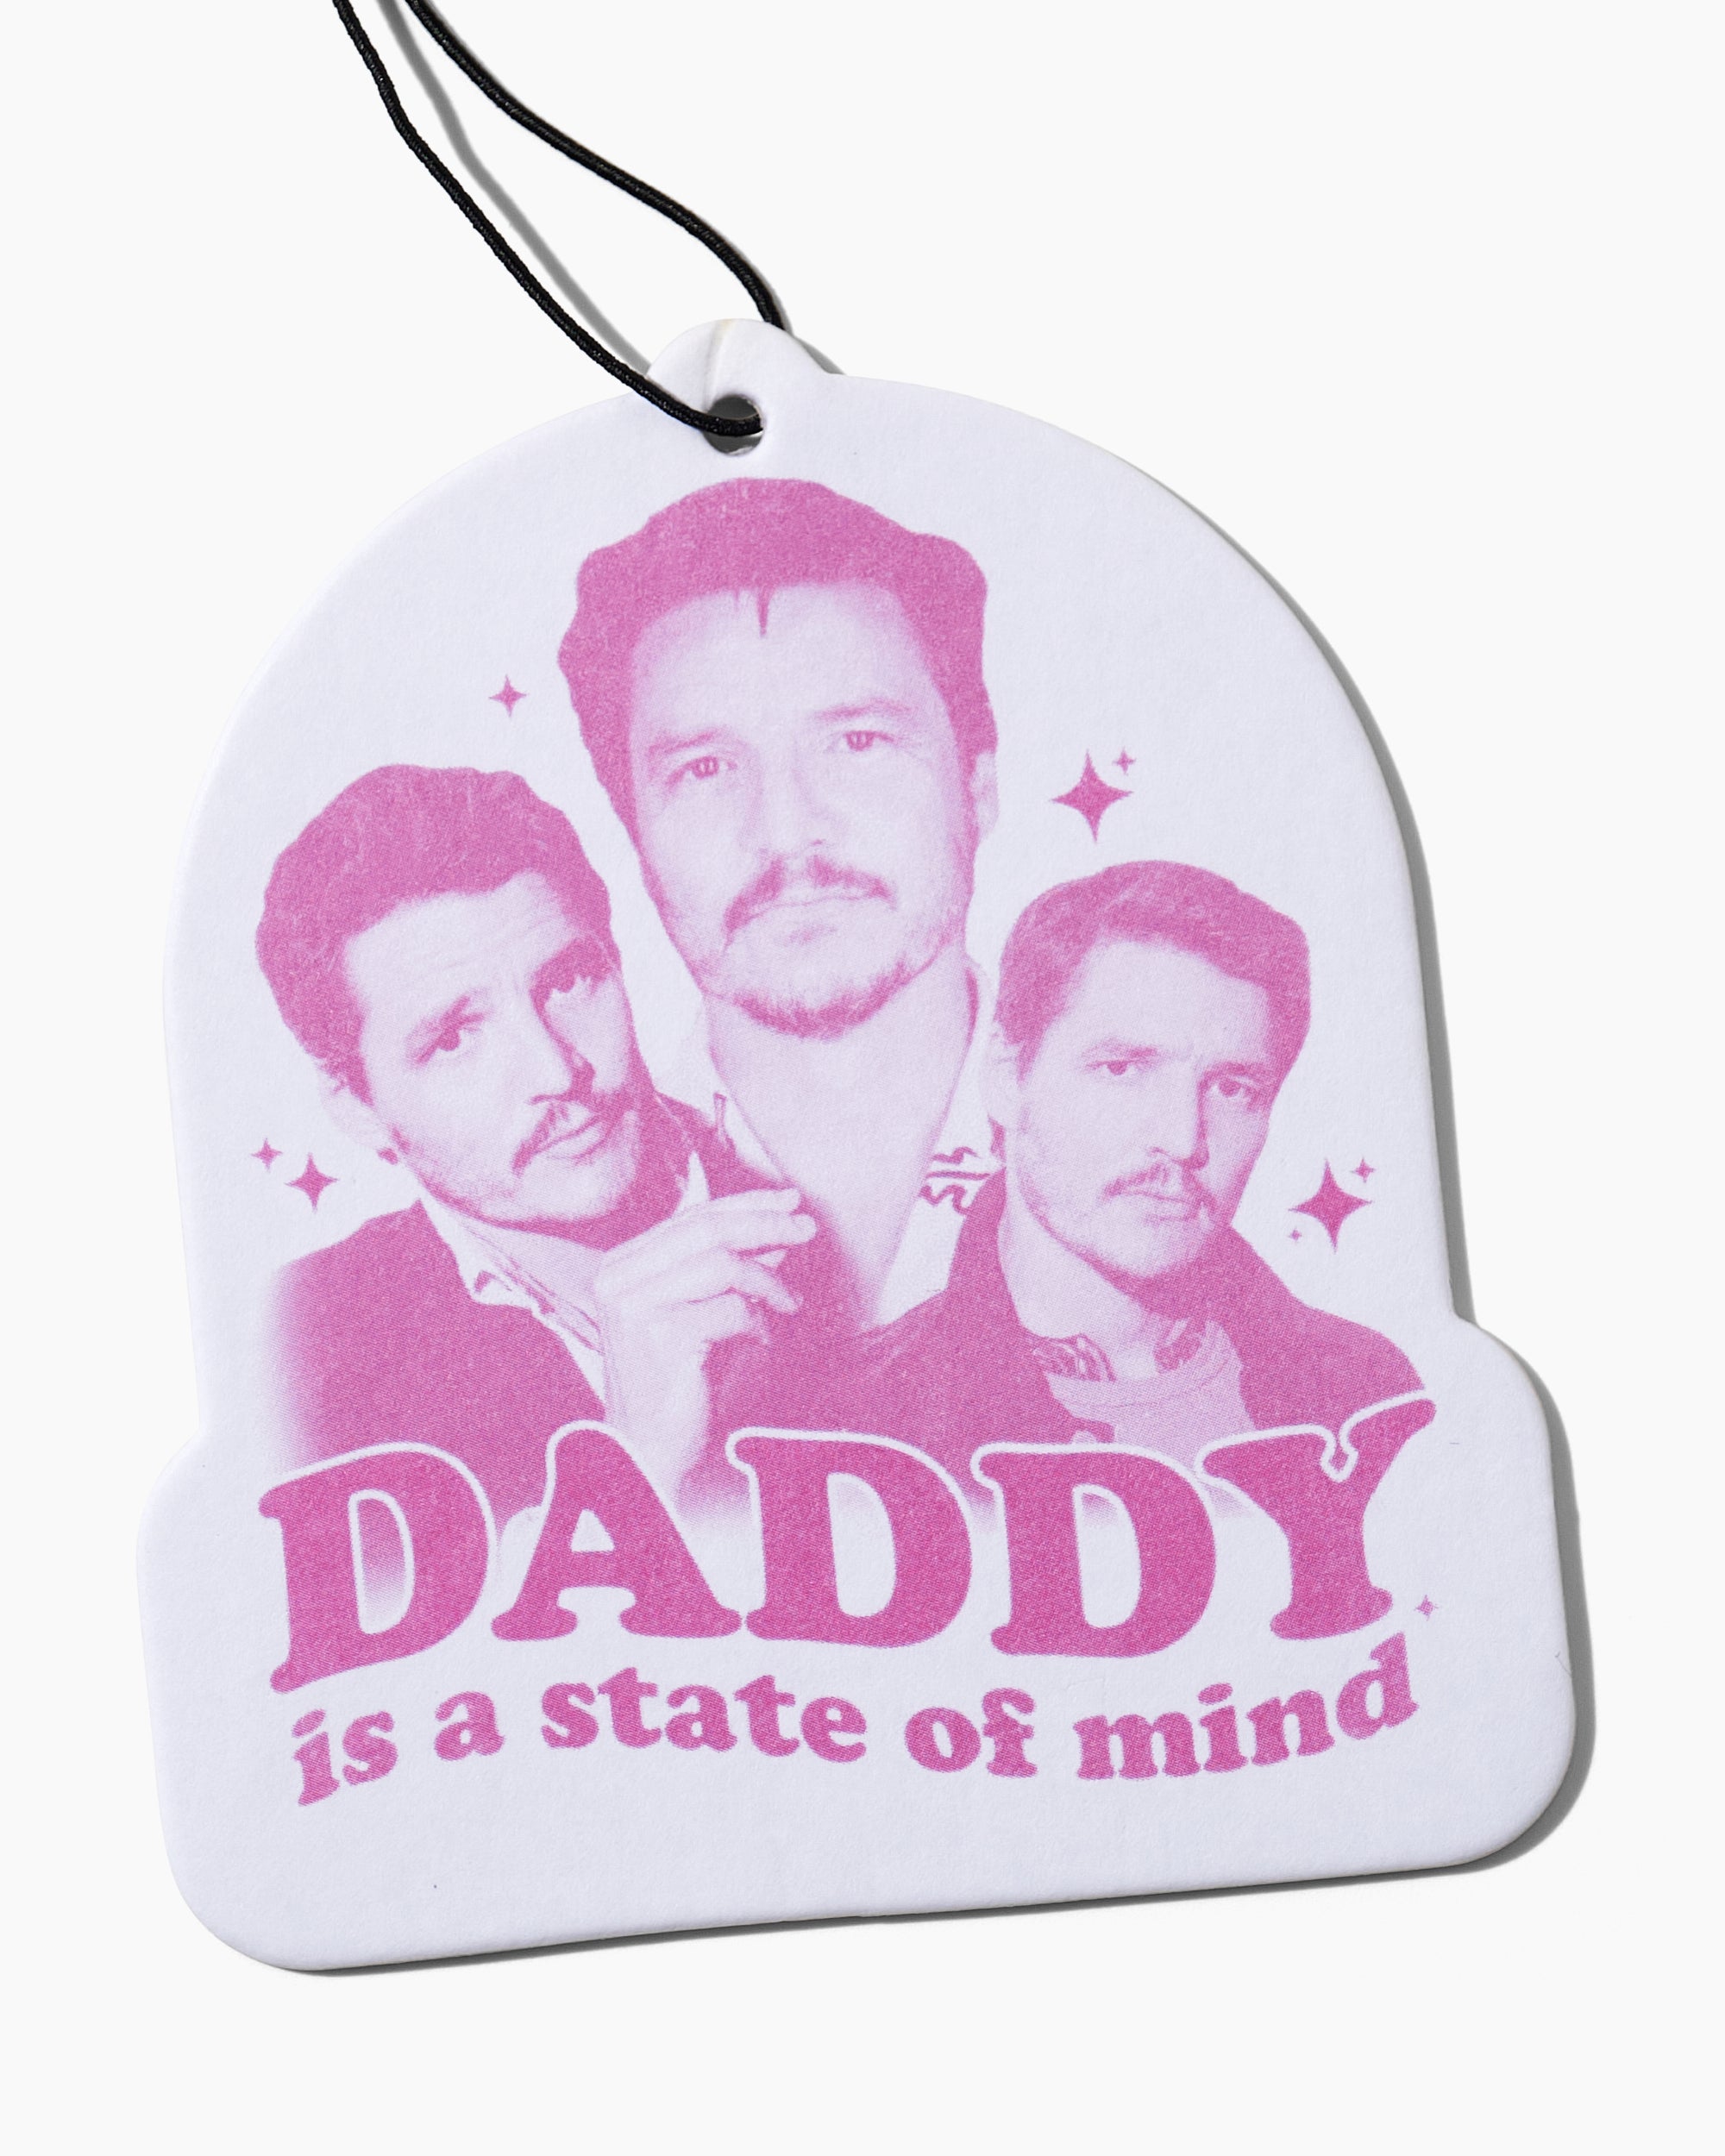 Daddy is a State of Mind Air Freshener